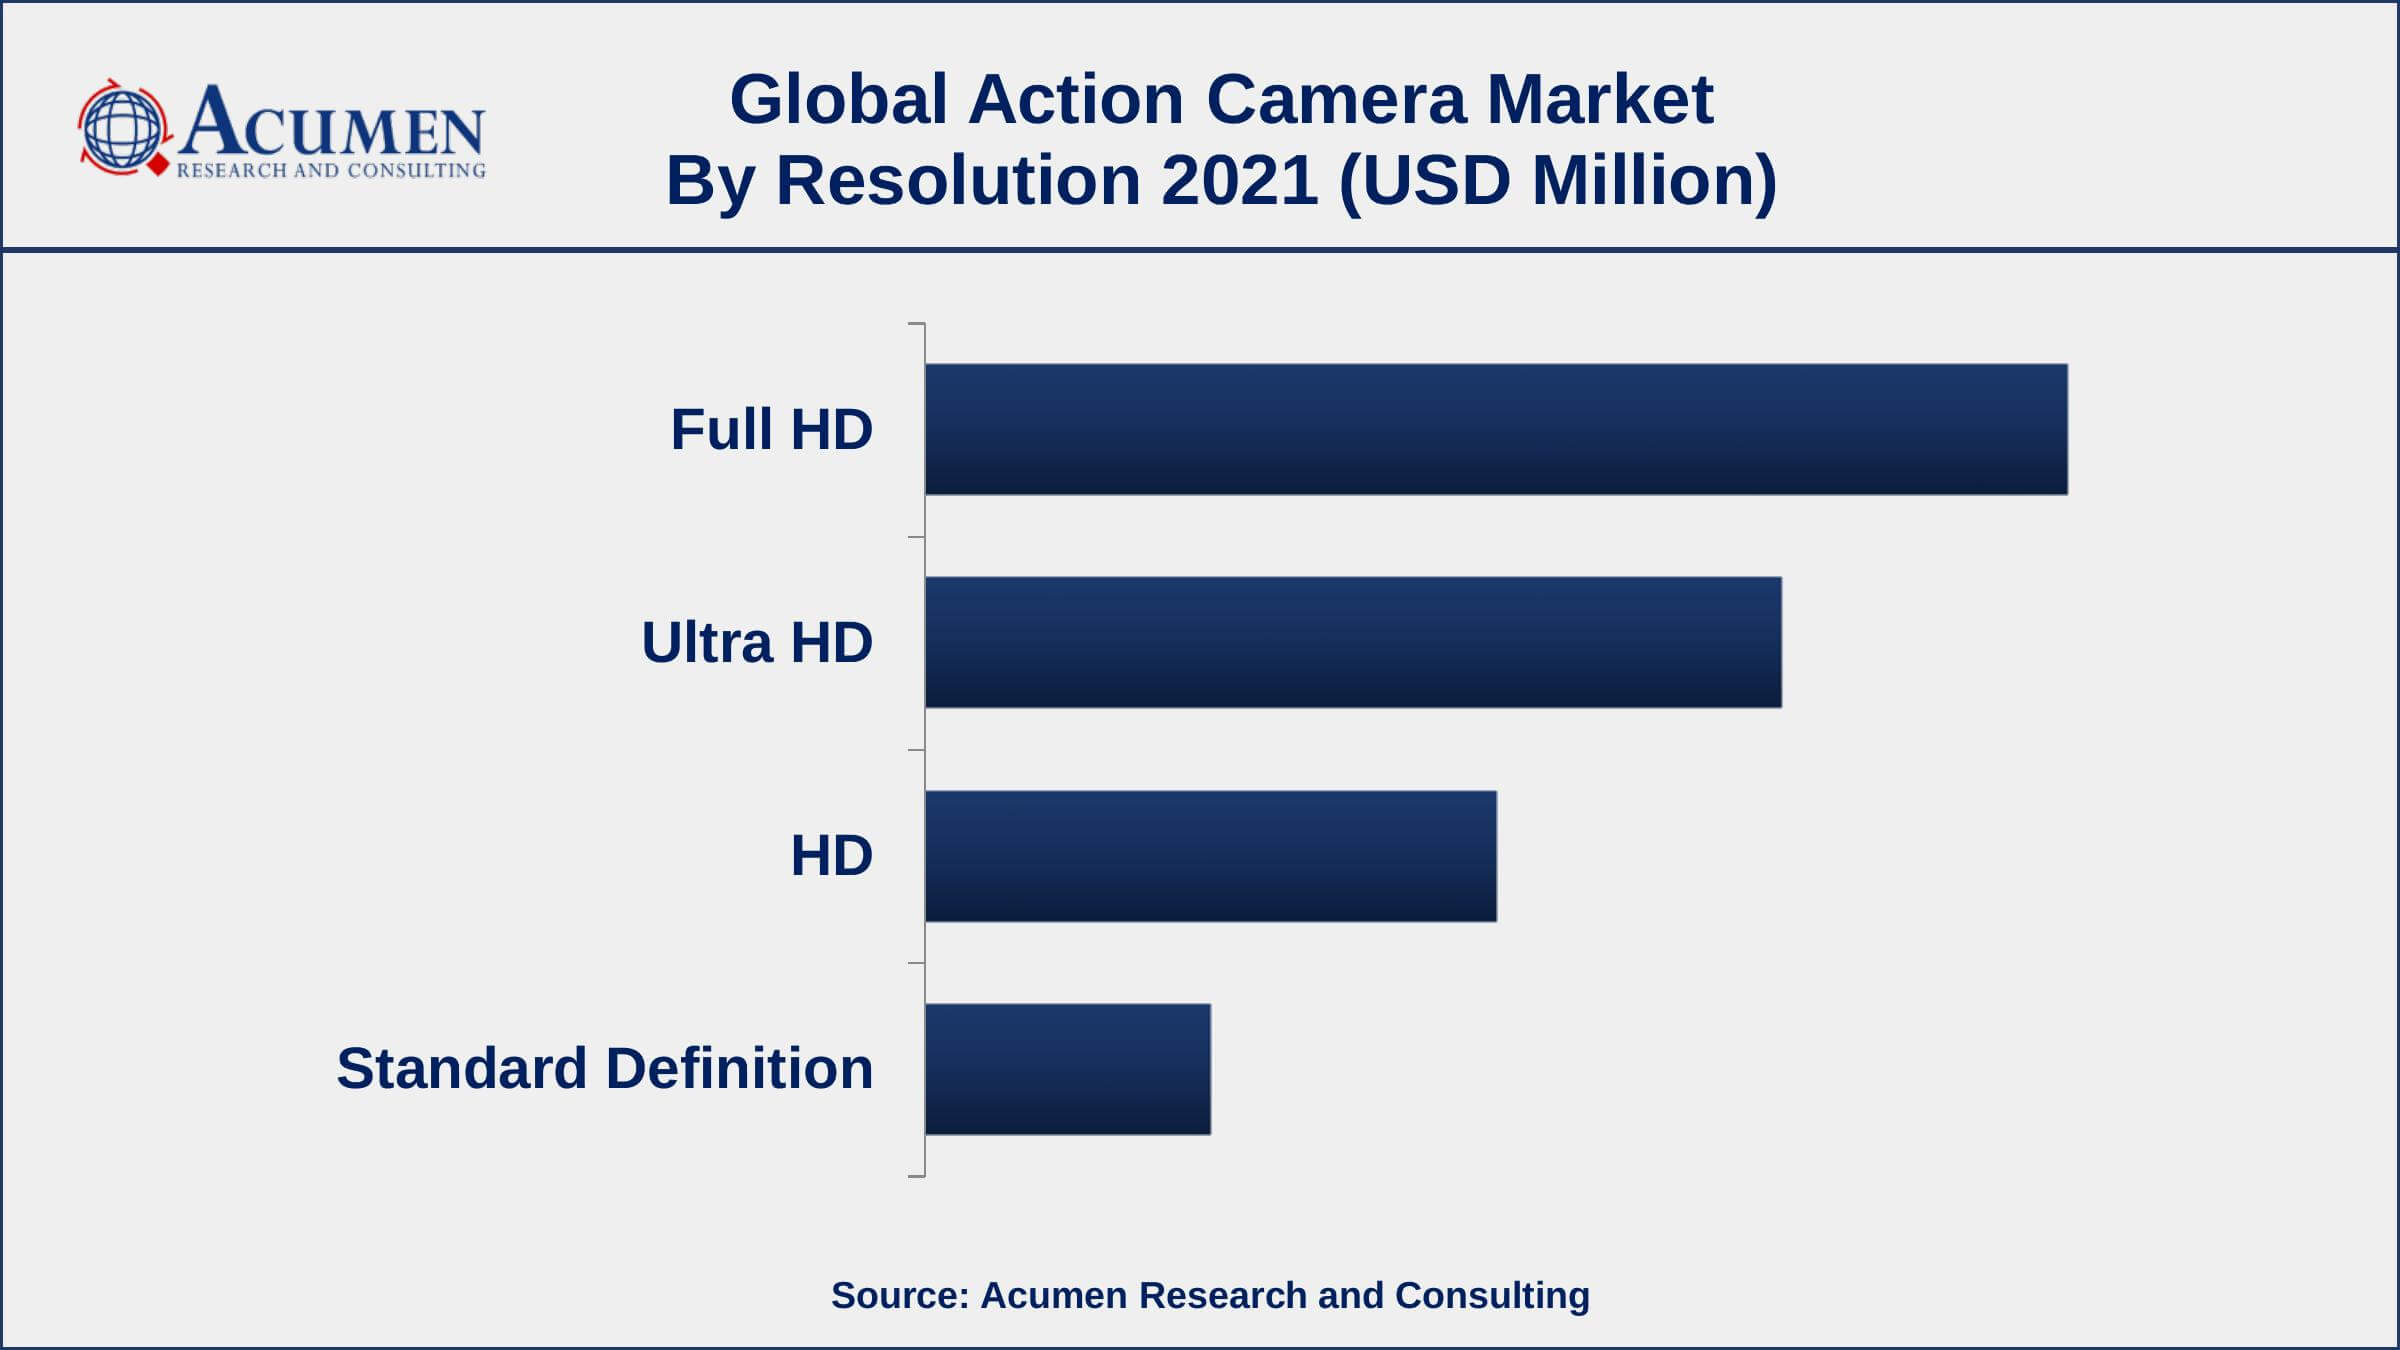 By resolution, fully-HD segment generated about 41% market share in 2021